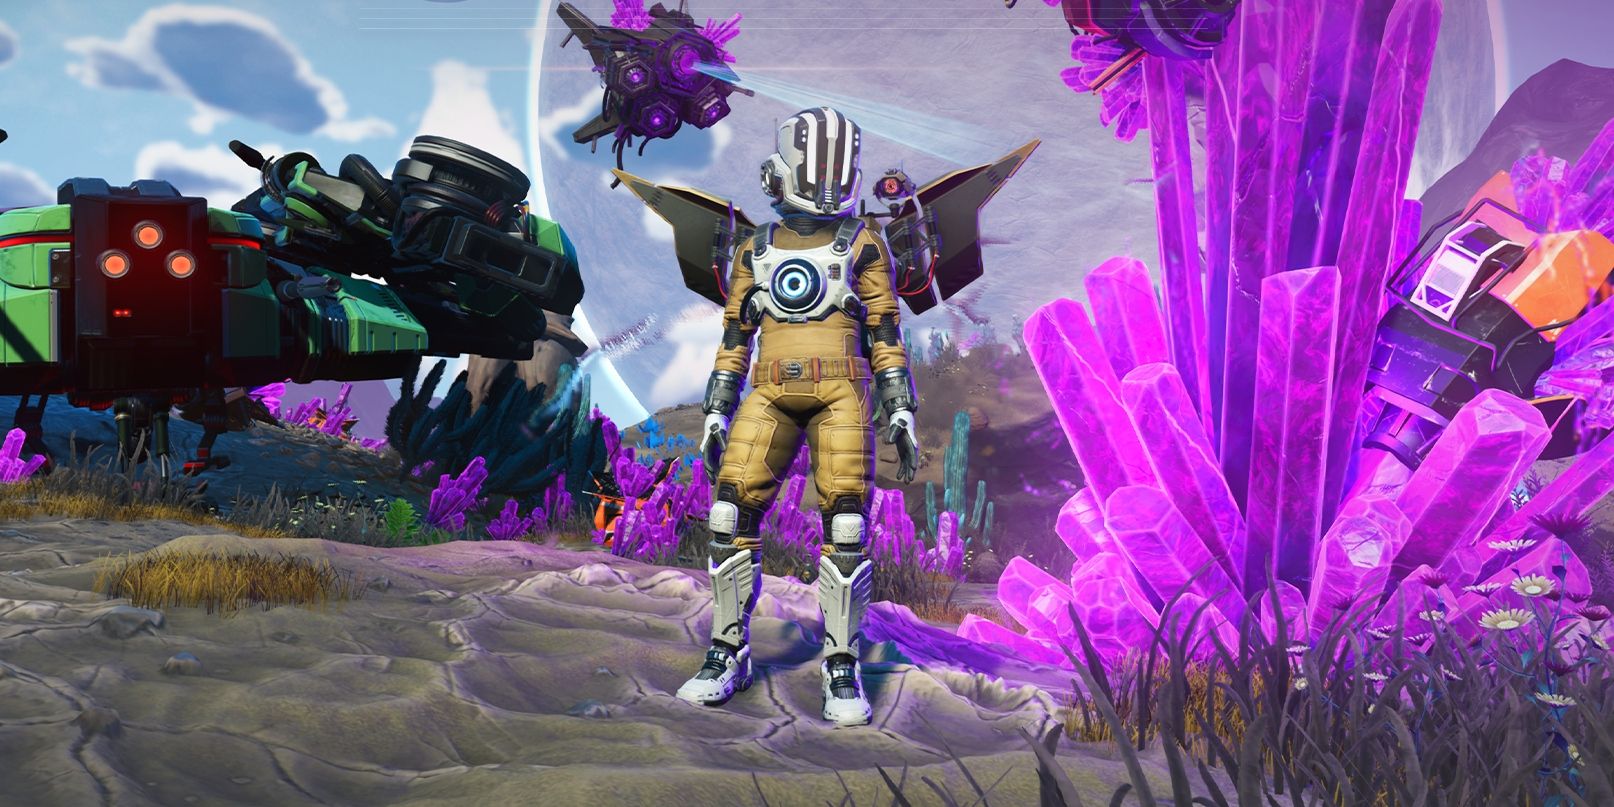 A traveler in No Man's Sky using a space suit on a planet. There are purple crystals behind them and a few drones as well.